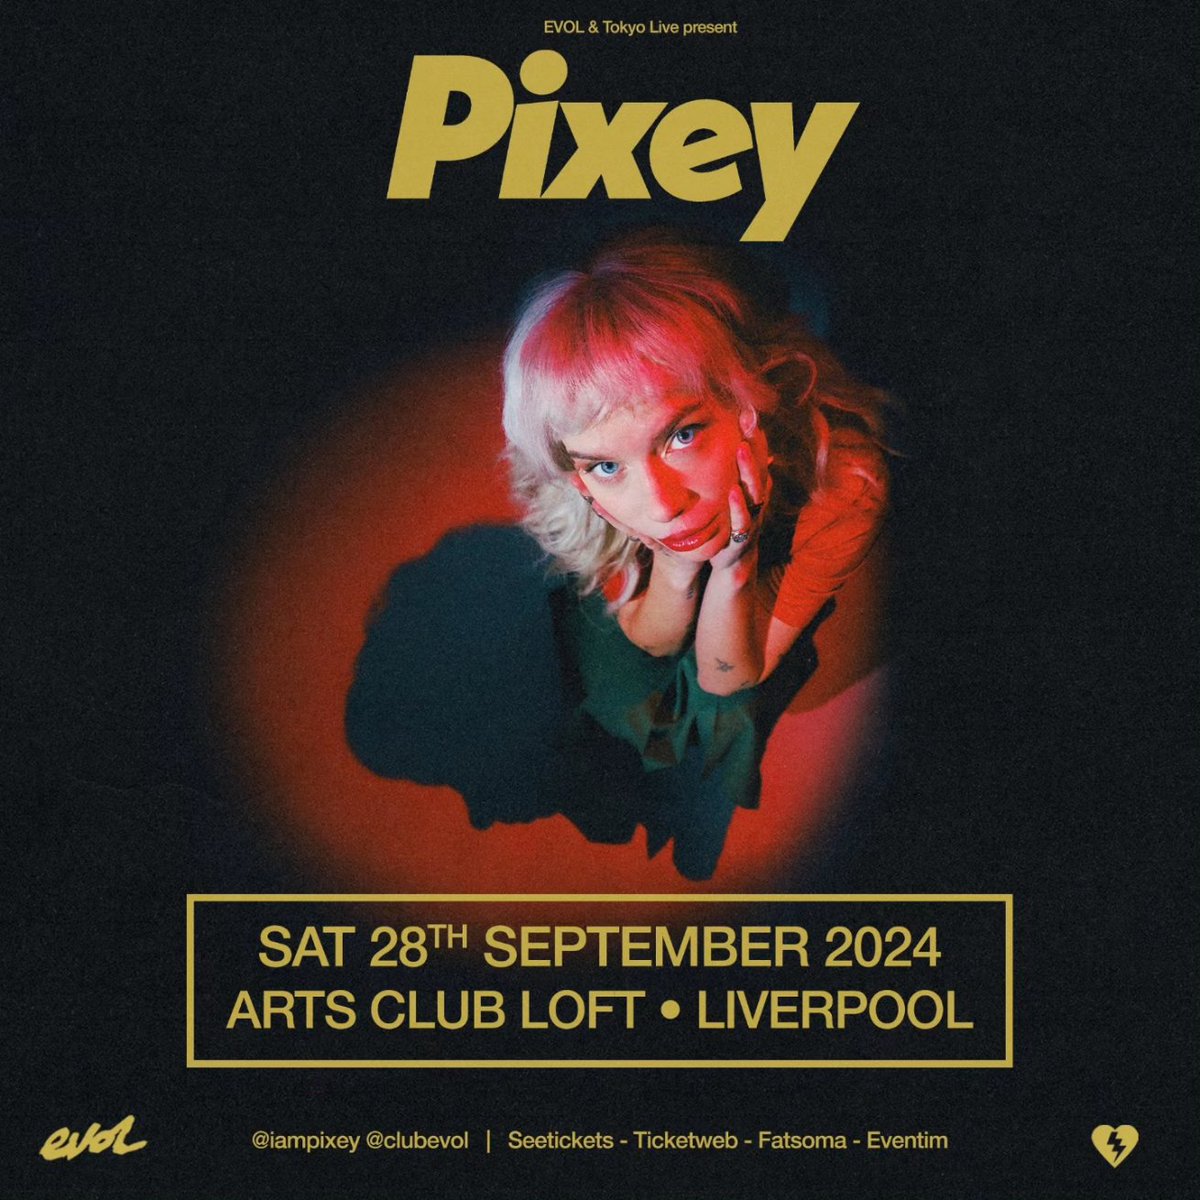 In case you missed it: @pixeyofficial plays a debut album home headline show at Liverpool's @artsclublpool, Saturday September 28th, bringing songs from 'Million Dollar Baby' 💸 (out Aug 2, @ChessClubRecord) to the live stage. Tickets available 👇 seetickets.com/event/pixey/ar…